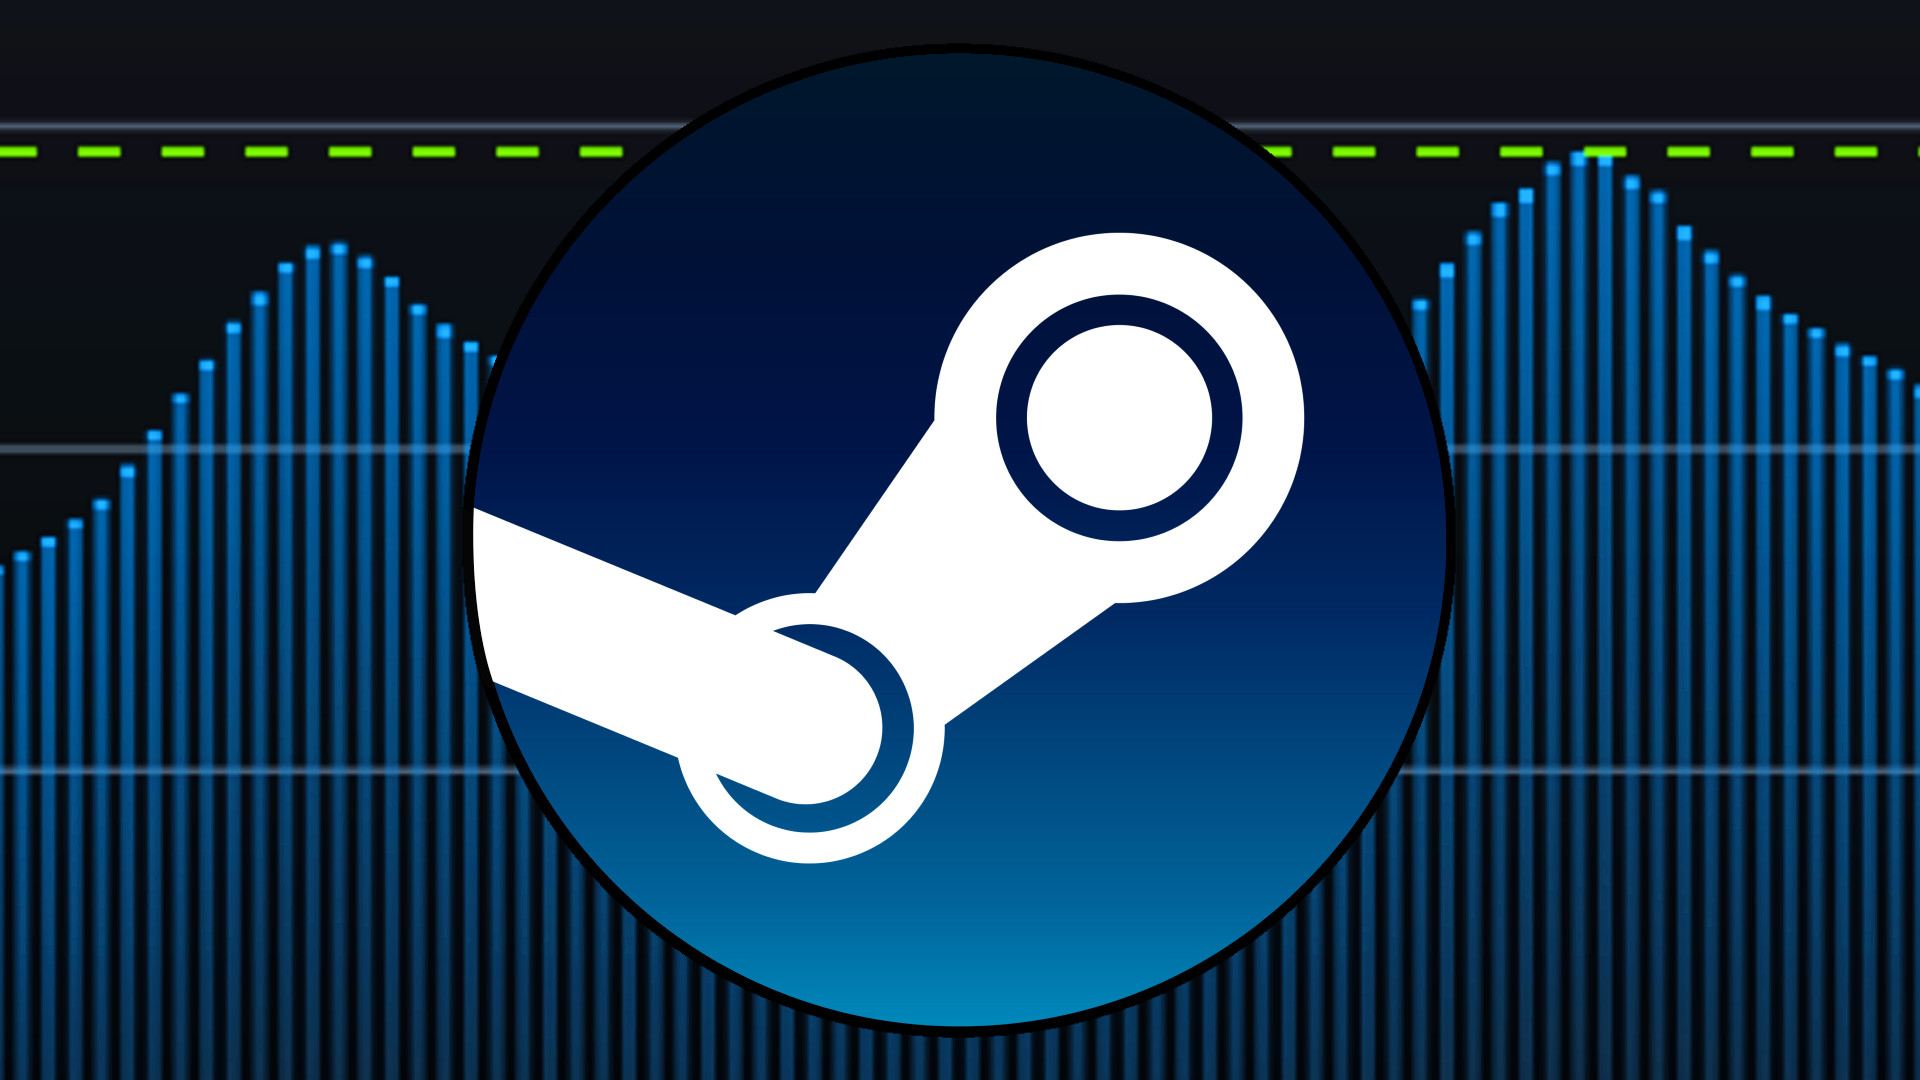 How to find SteamID, look up and check vacbanned Steam hex 64